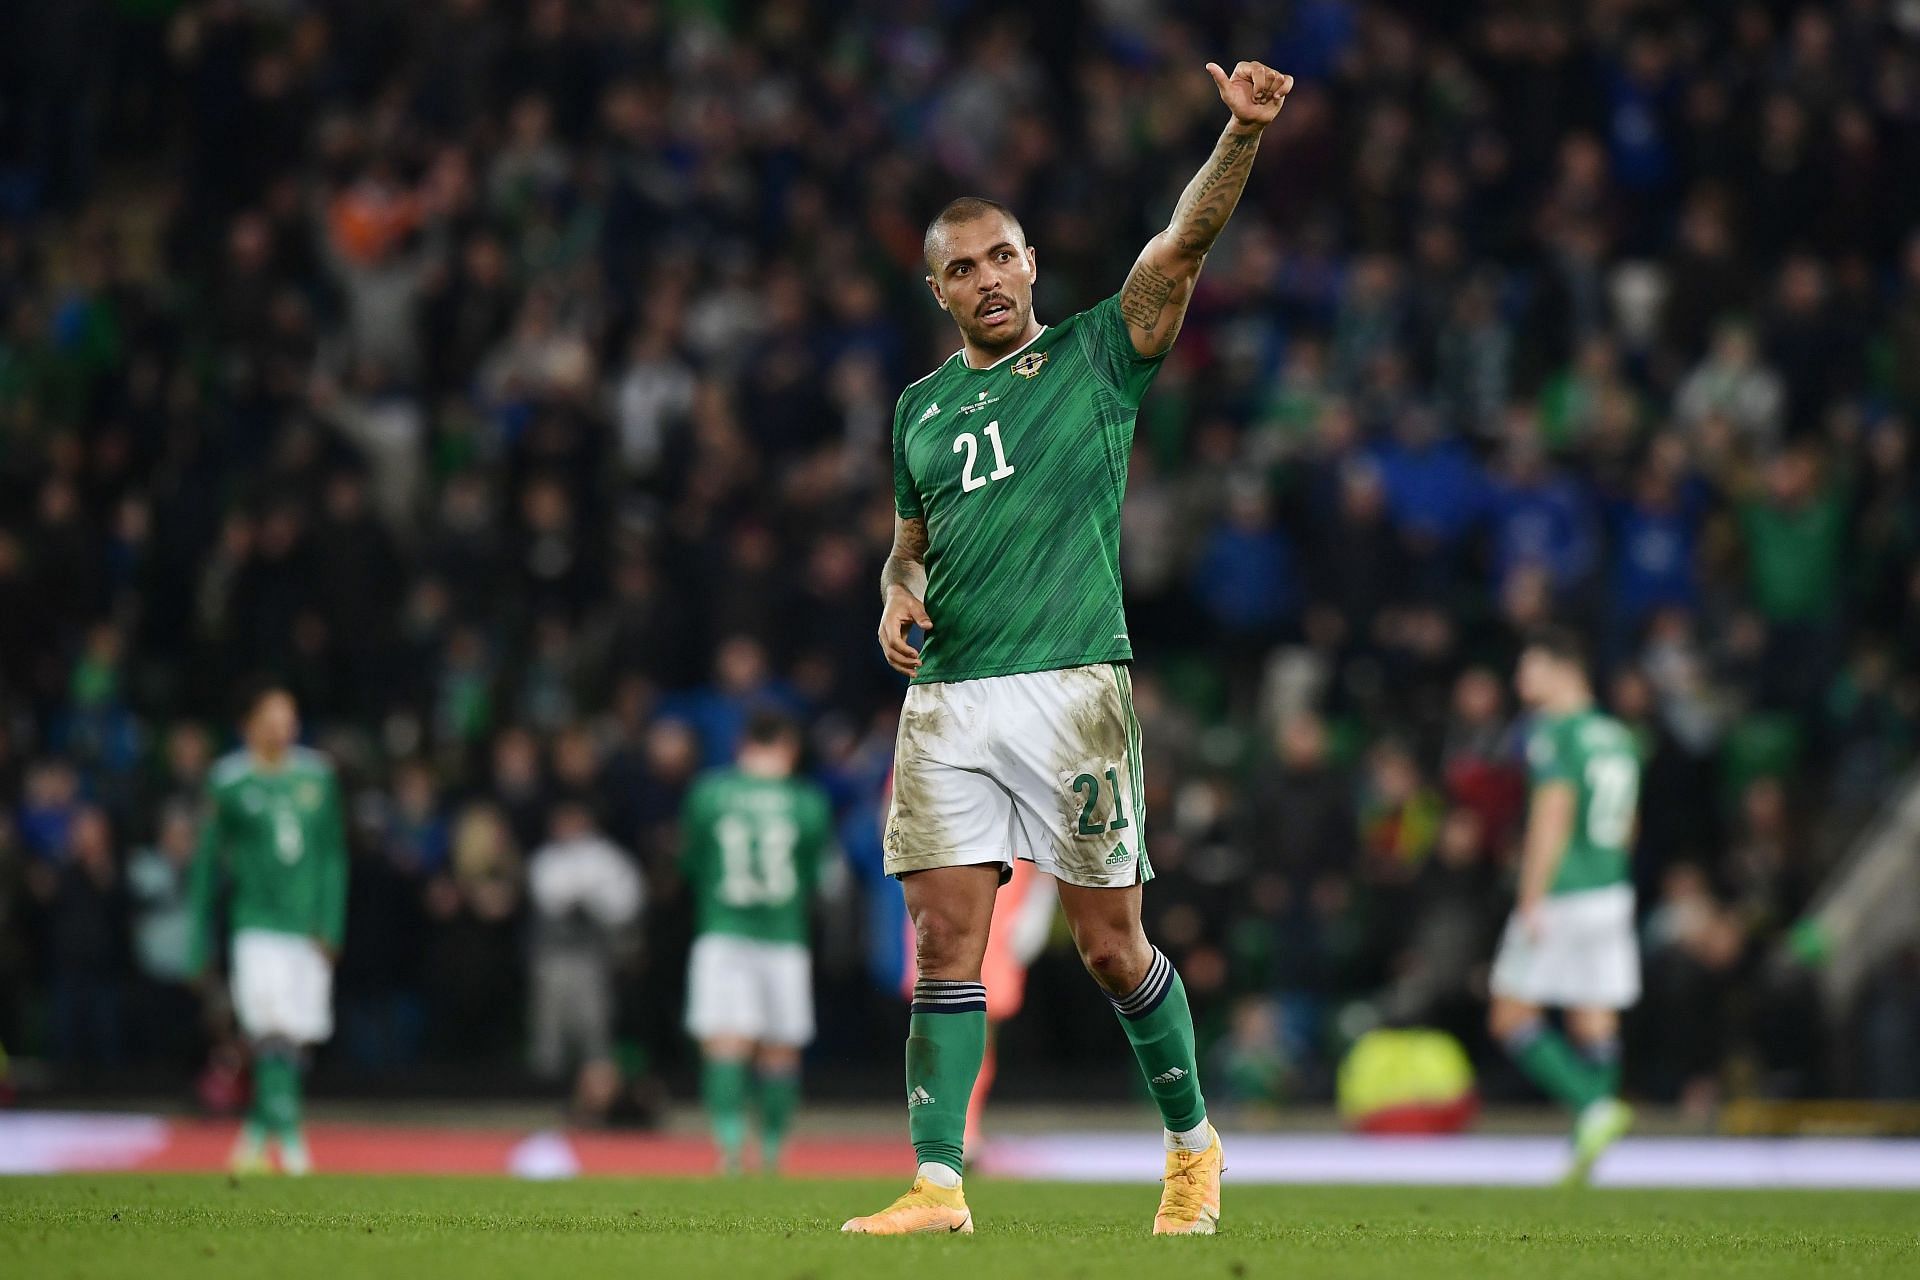 Northern Ireland play host to Greece on Thursday